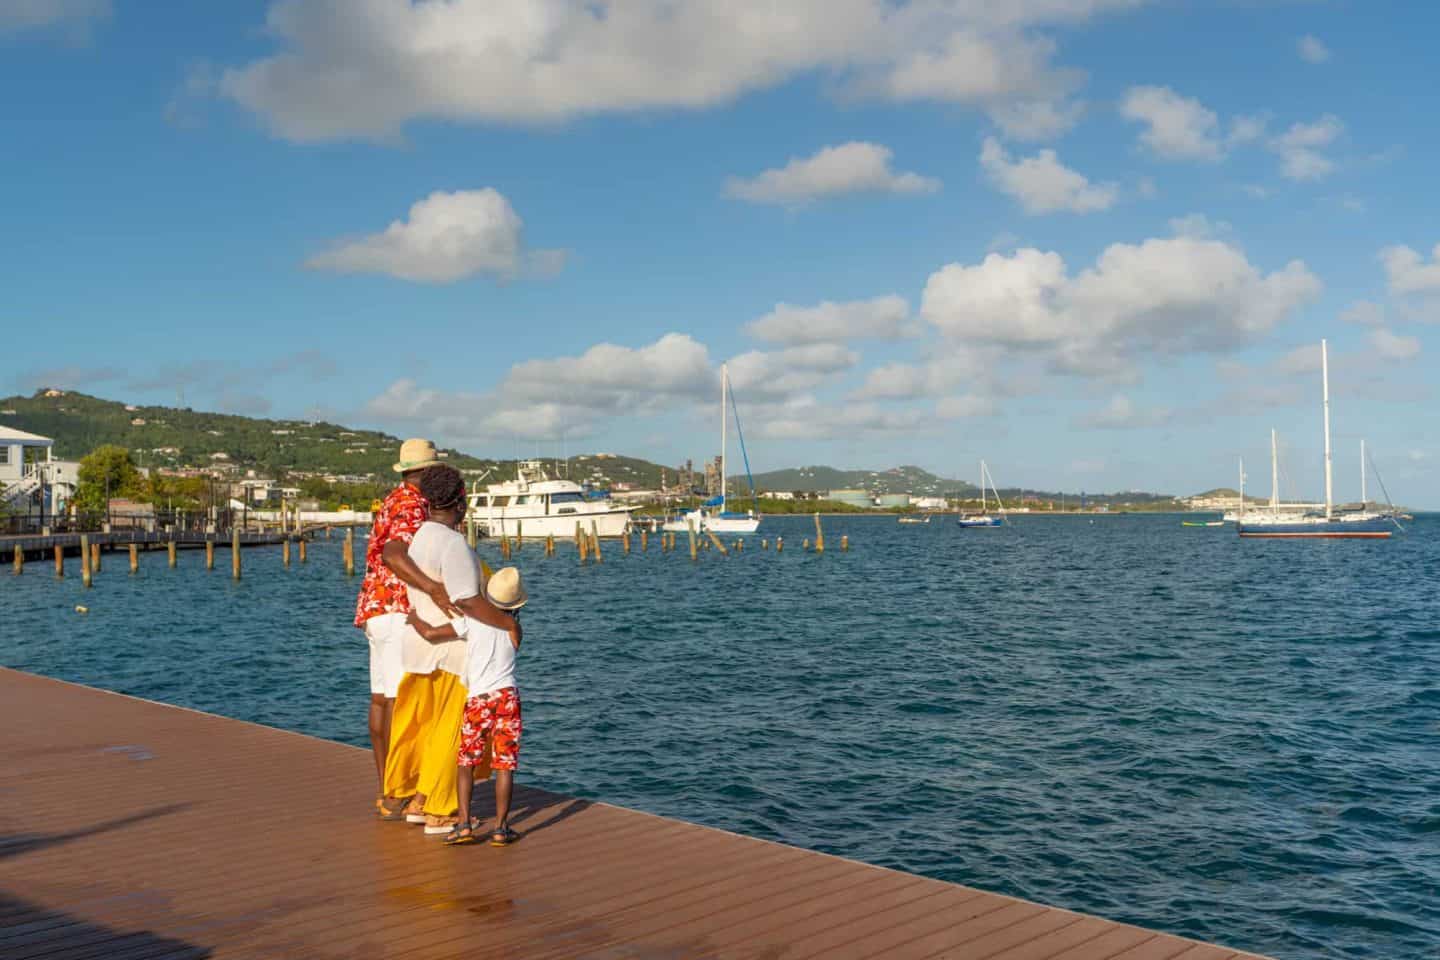 Black Family Travel Things To Do In St Croix Black Family Travel Black Travelers Black Kids Travel Black Family Traveling The World Black Worldschoolers African American Family 101